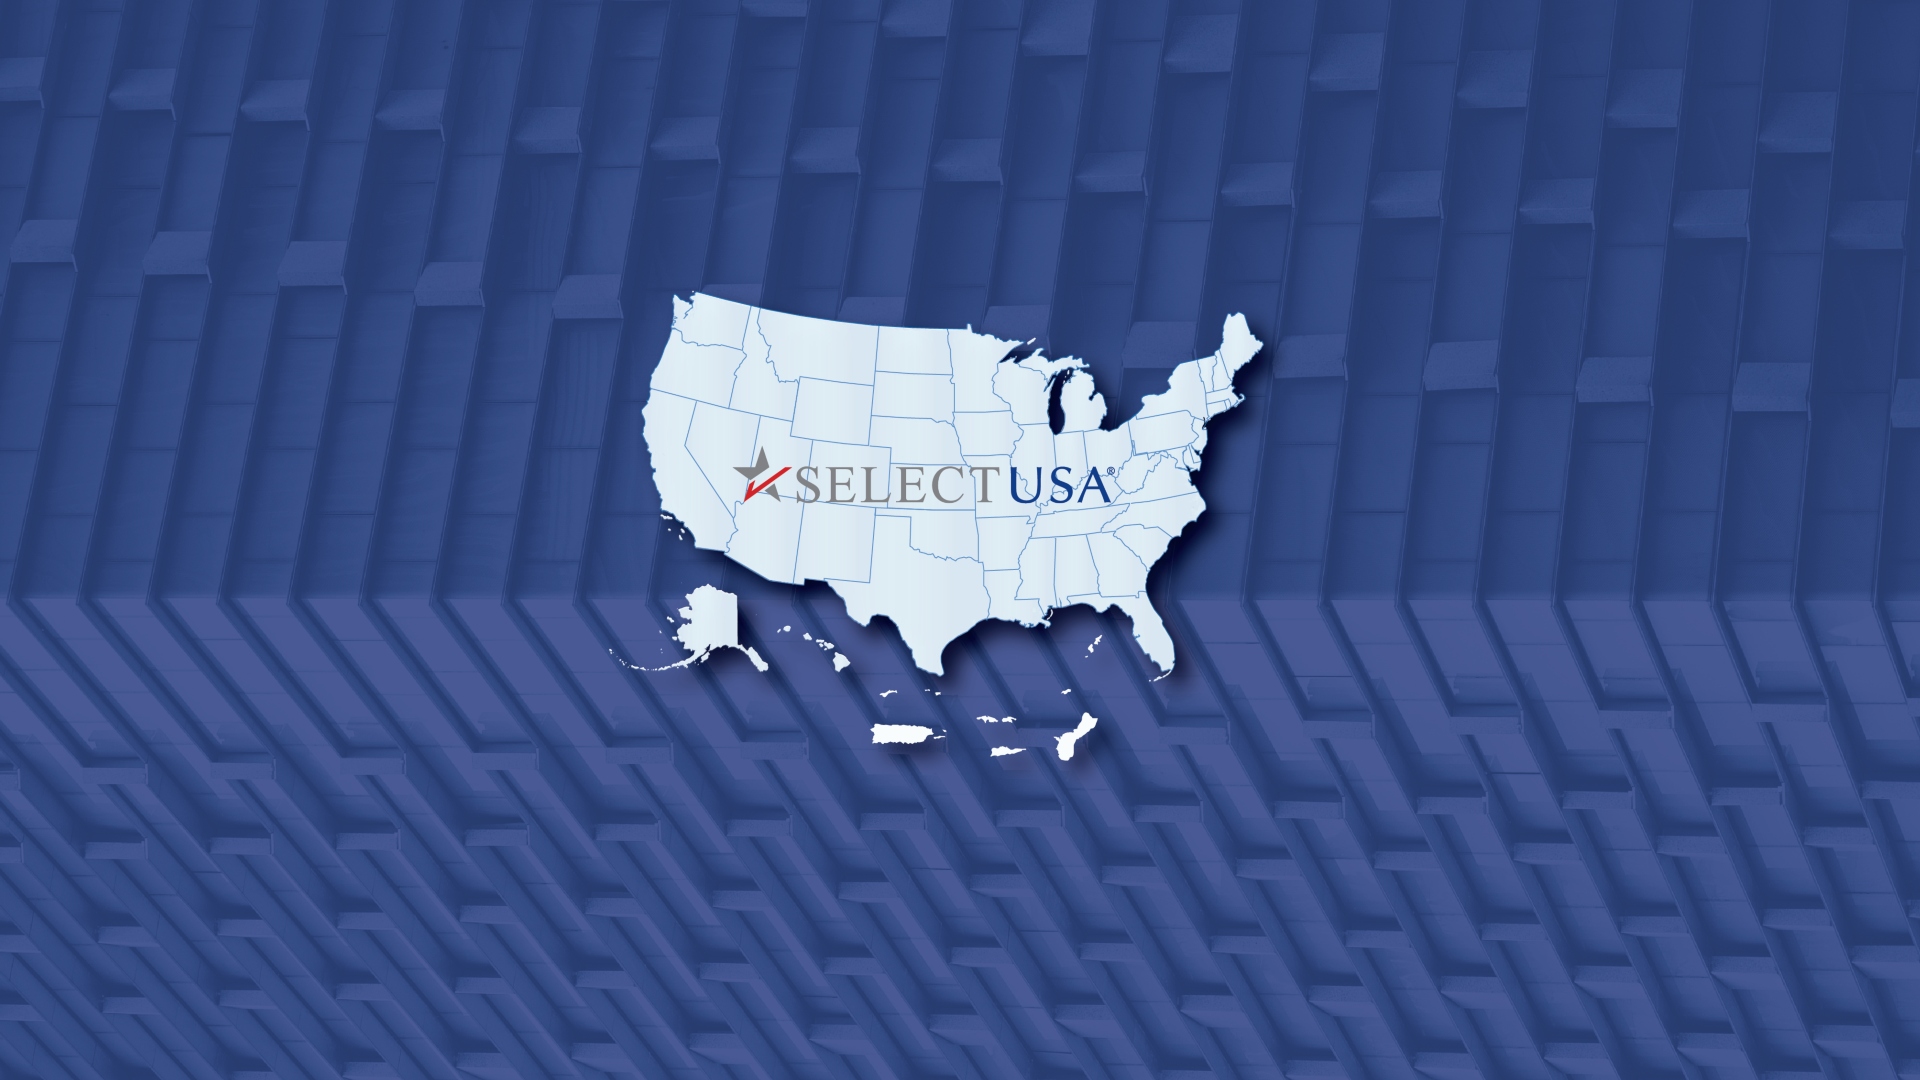 Outline of the United States with the SelectUSA Logo in the center.